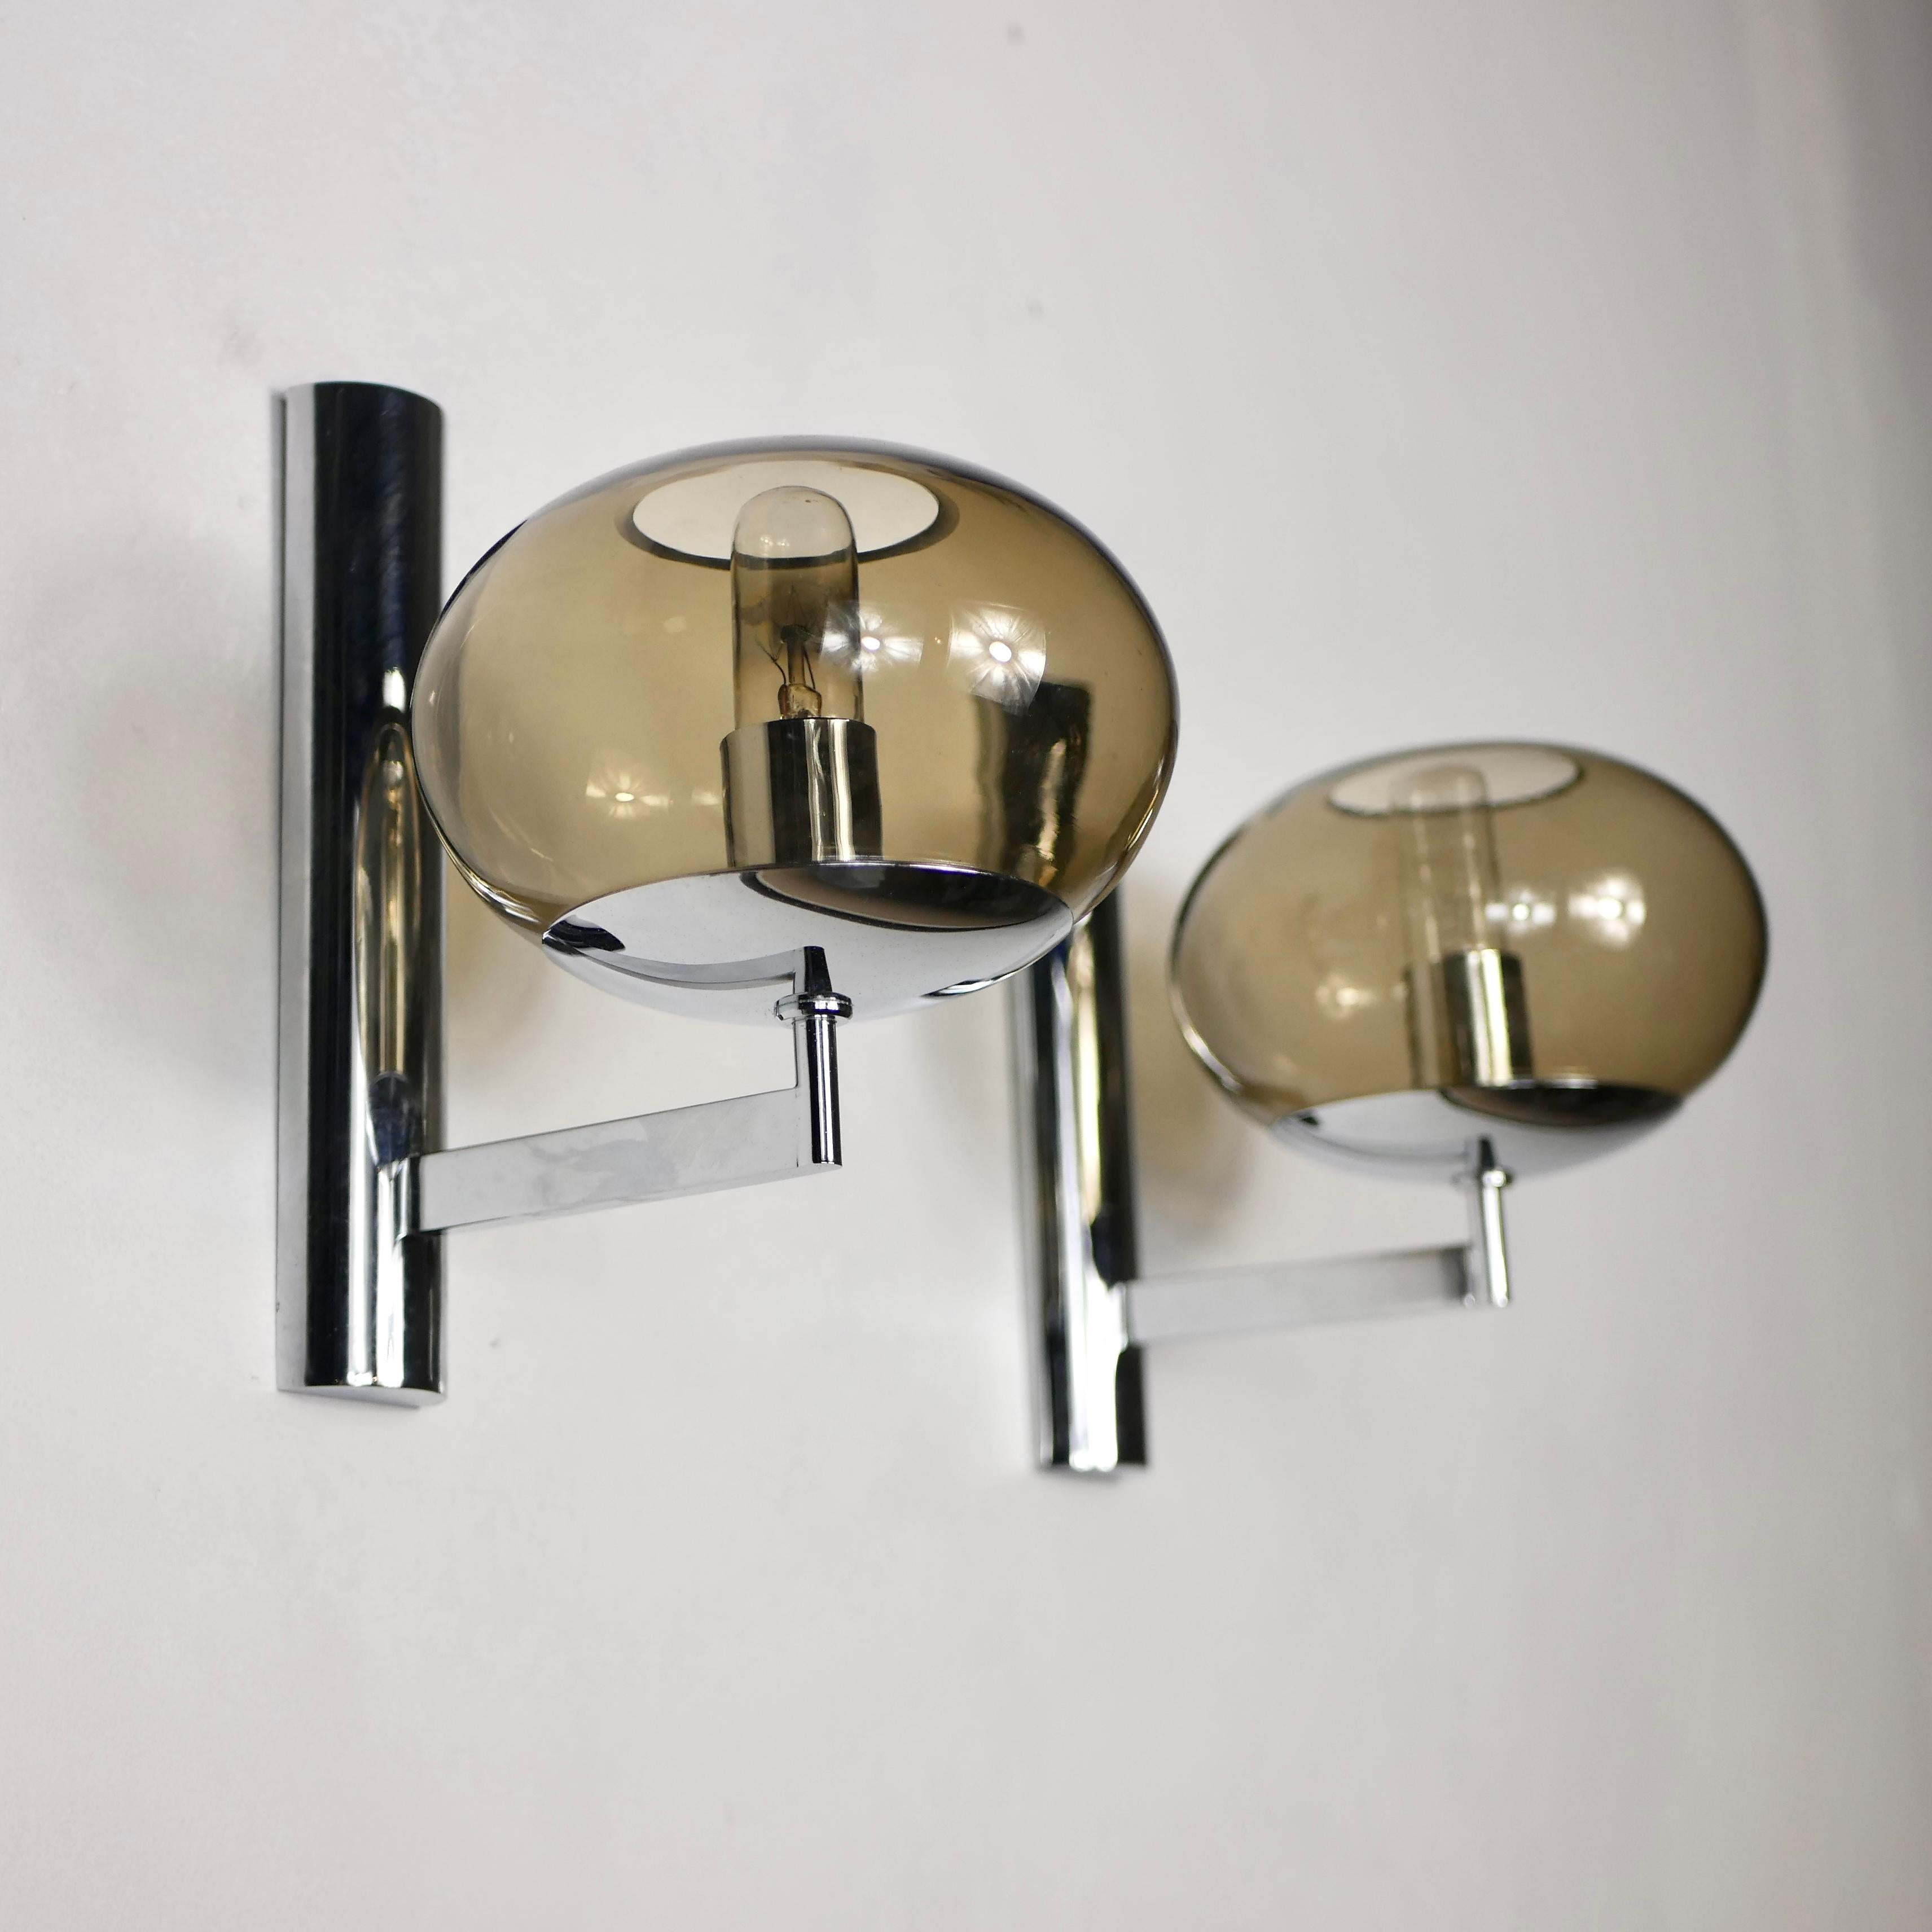 Beautiful and elegant pair of Gaetano Sciolari sconces, made in the 1960-70s by the master in Italy.
Chromed metal and smoked glass.
Very good condition.
Dimensions : H21,5, W15, D20cm
